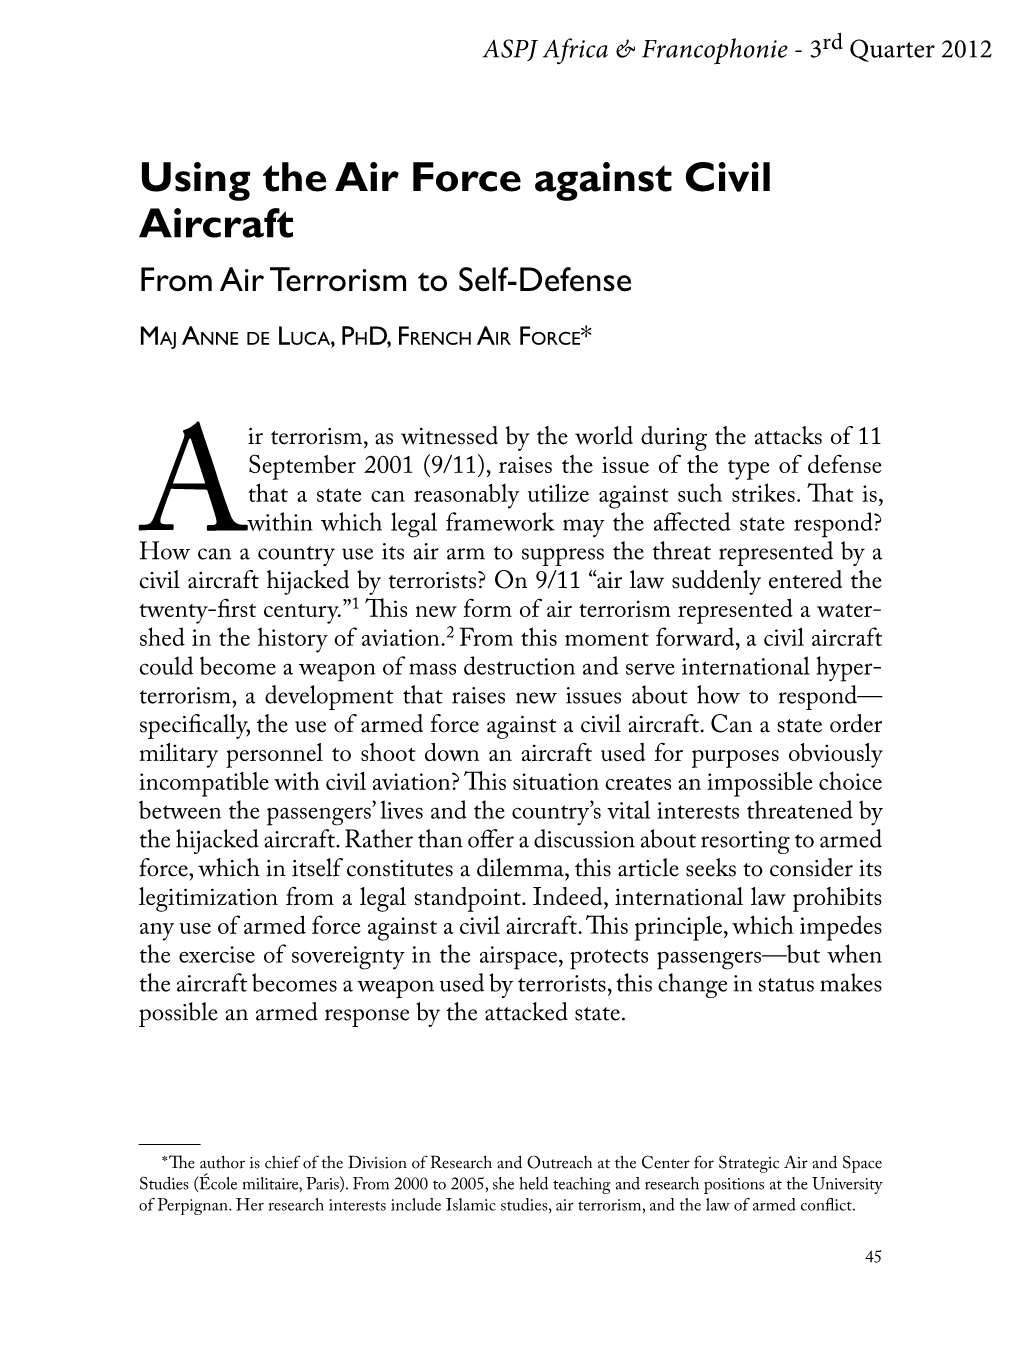 Using the Air Force Against Civil Aircraft from Air Terrorism to Self-Defense